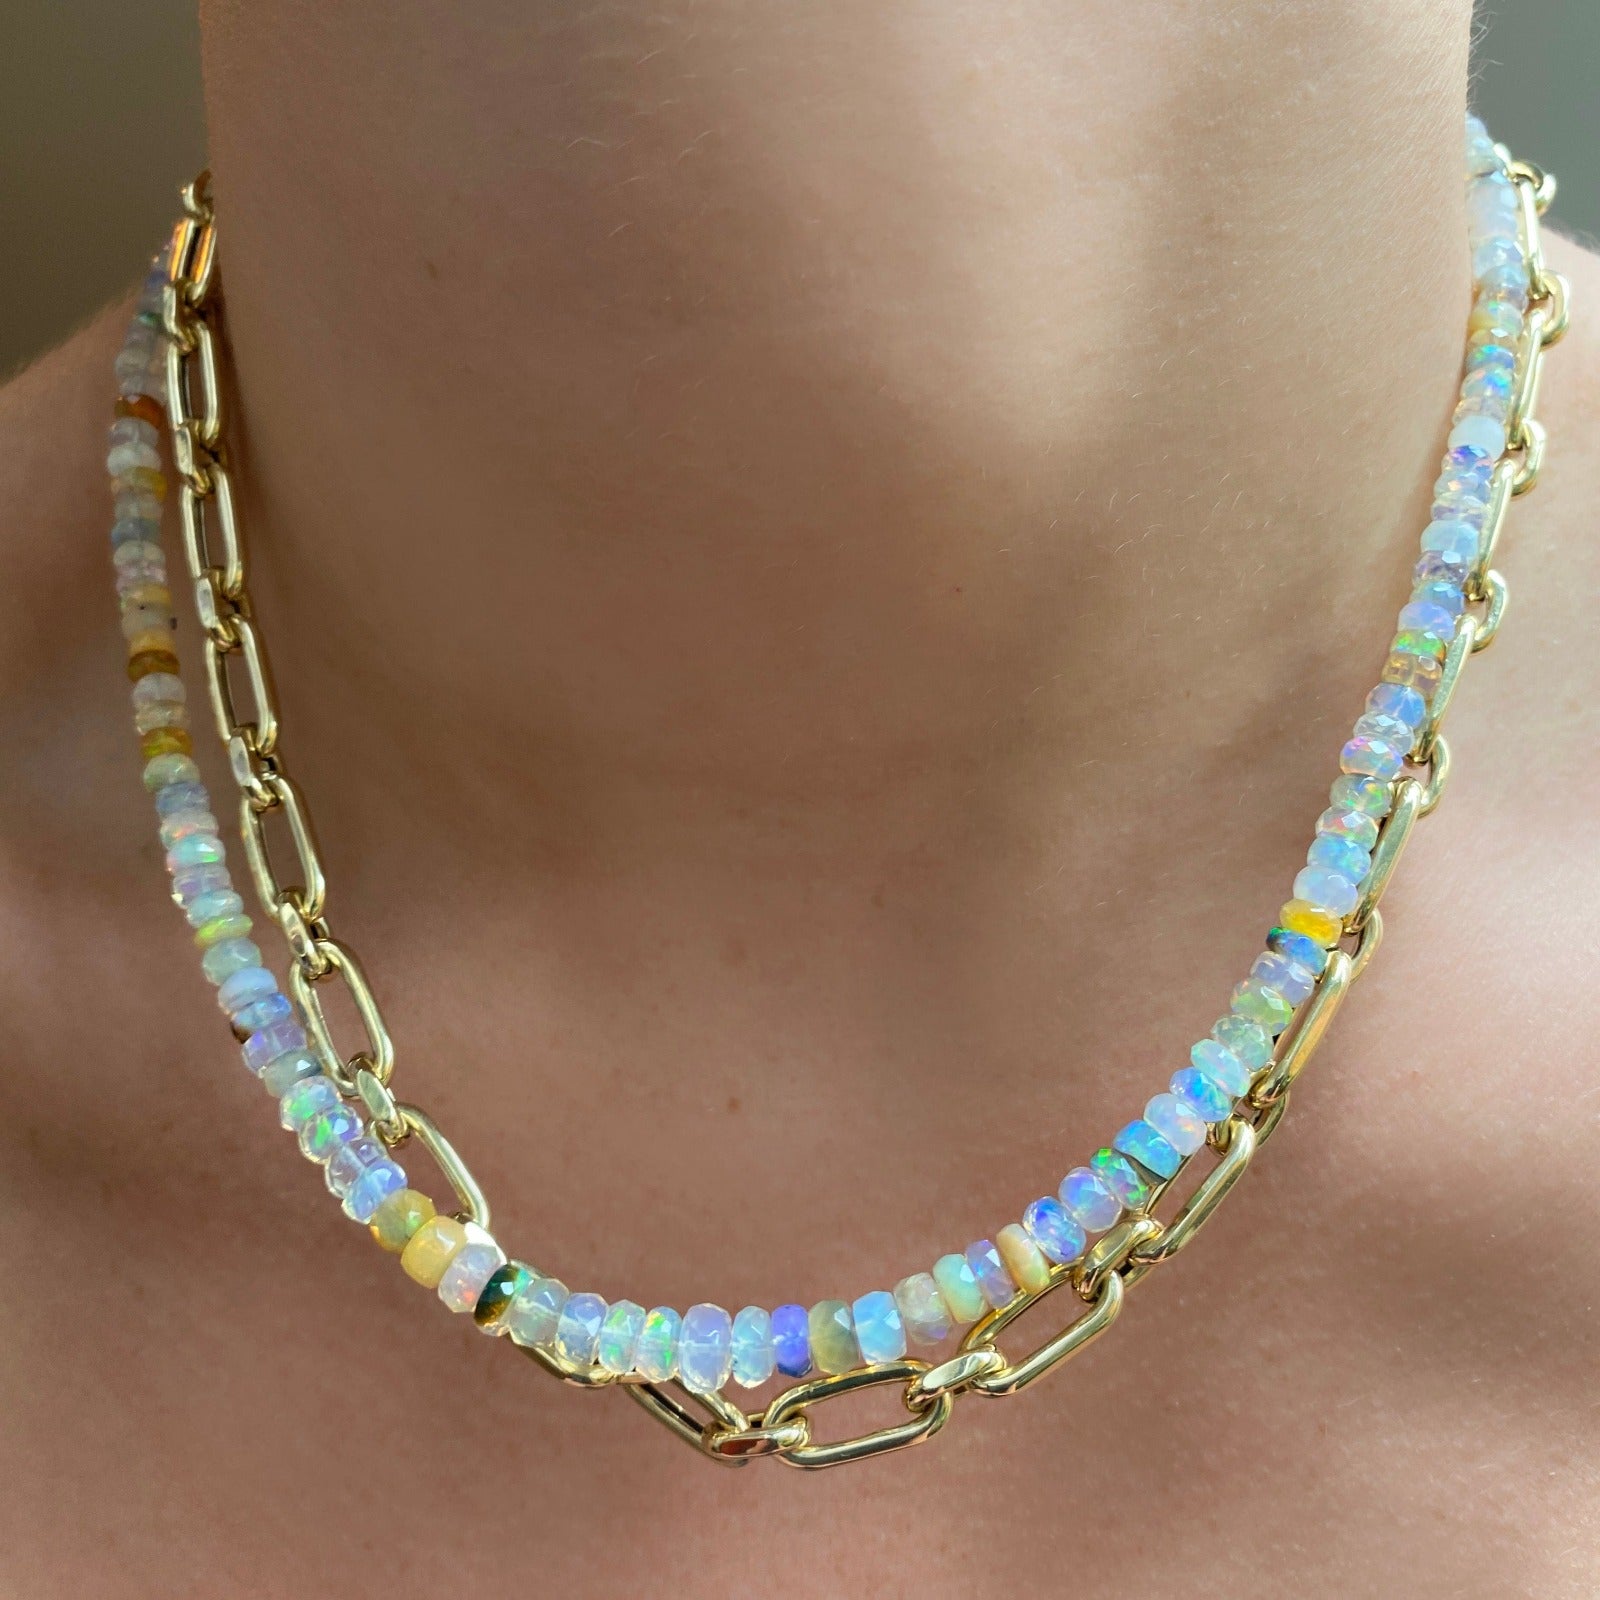 Shimmering beaded necklace made of faceted opals in shades of white, clear, and yellow on a gold linking ovals clasp. Styled on a neck layered with the diamond cut link chain necklace.